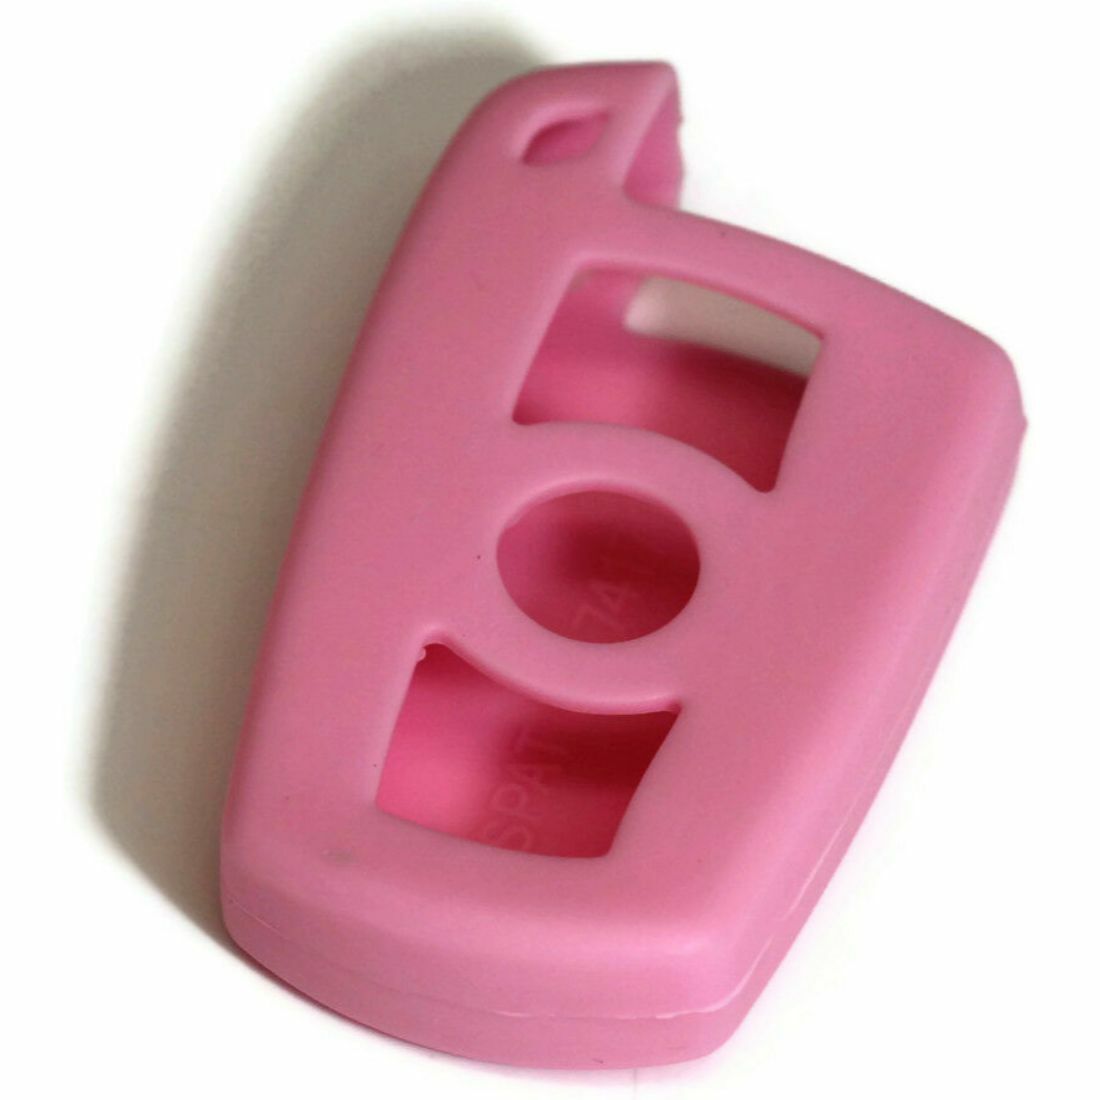 Pink Silicone Key Fob Cover BMW Spasm price for Purchase models most